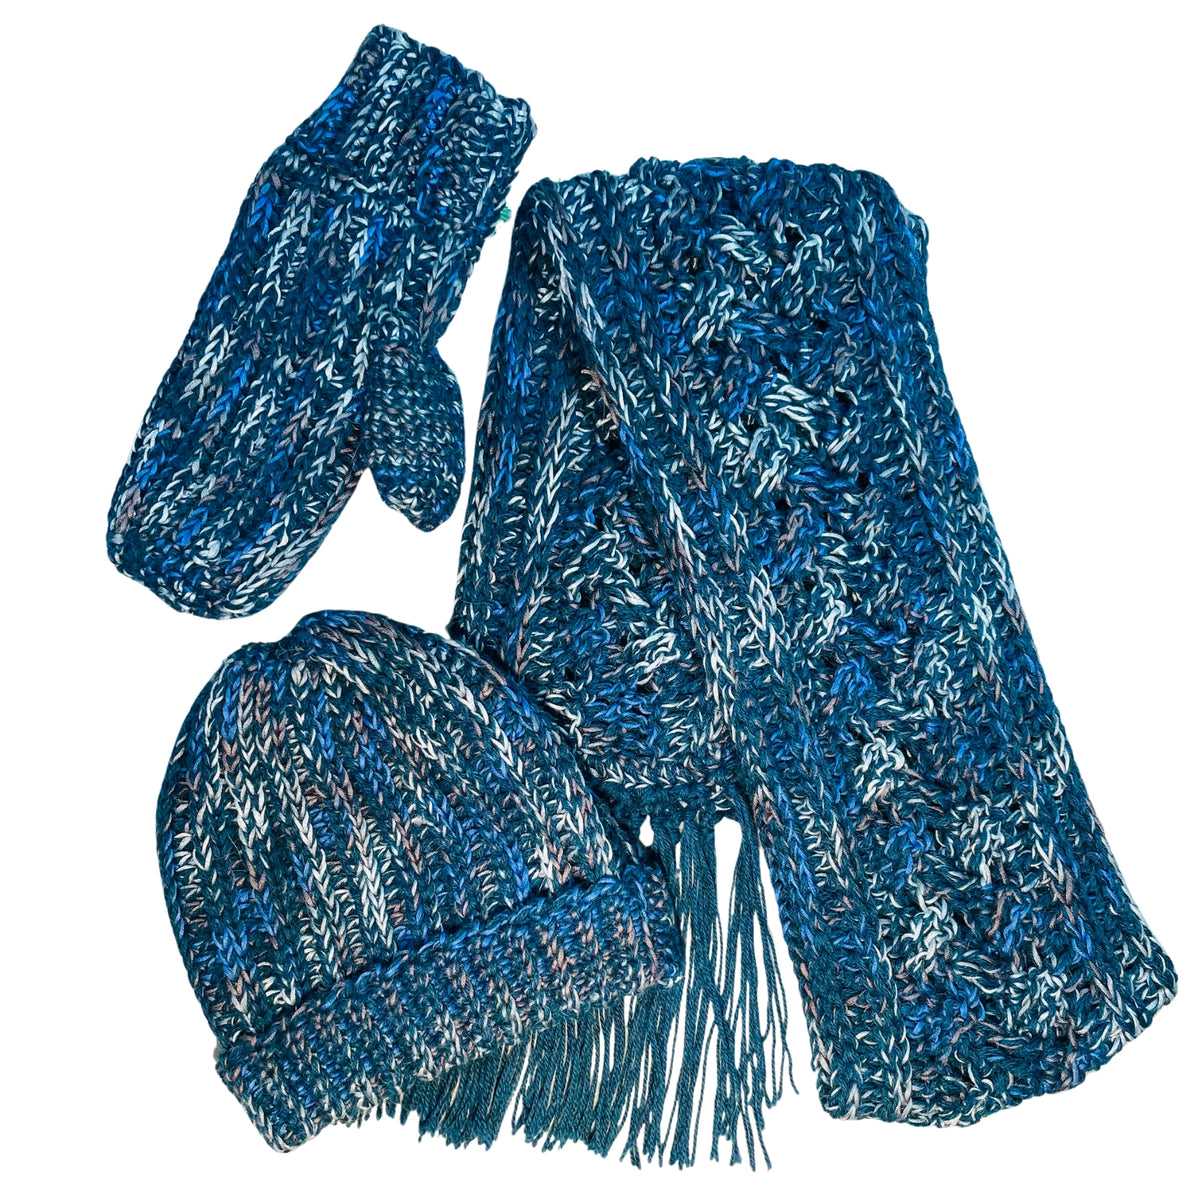 Cozy soft warm alpaca and bamboo matching set of ridge ribbed hat, scarf with long tassels, and ridge ribbed mittens for winter fashion. Handmade knitted crochet items made from yarn in the colors ocean blue, dark turquoise, cobalt, cerulean, gray, and white.